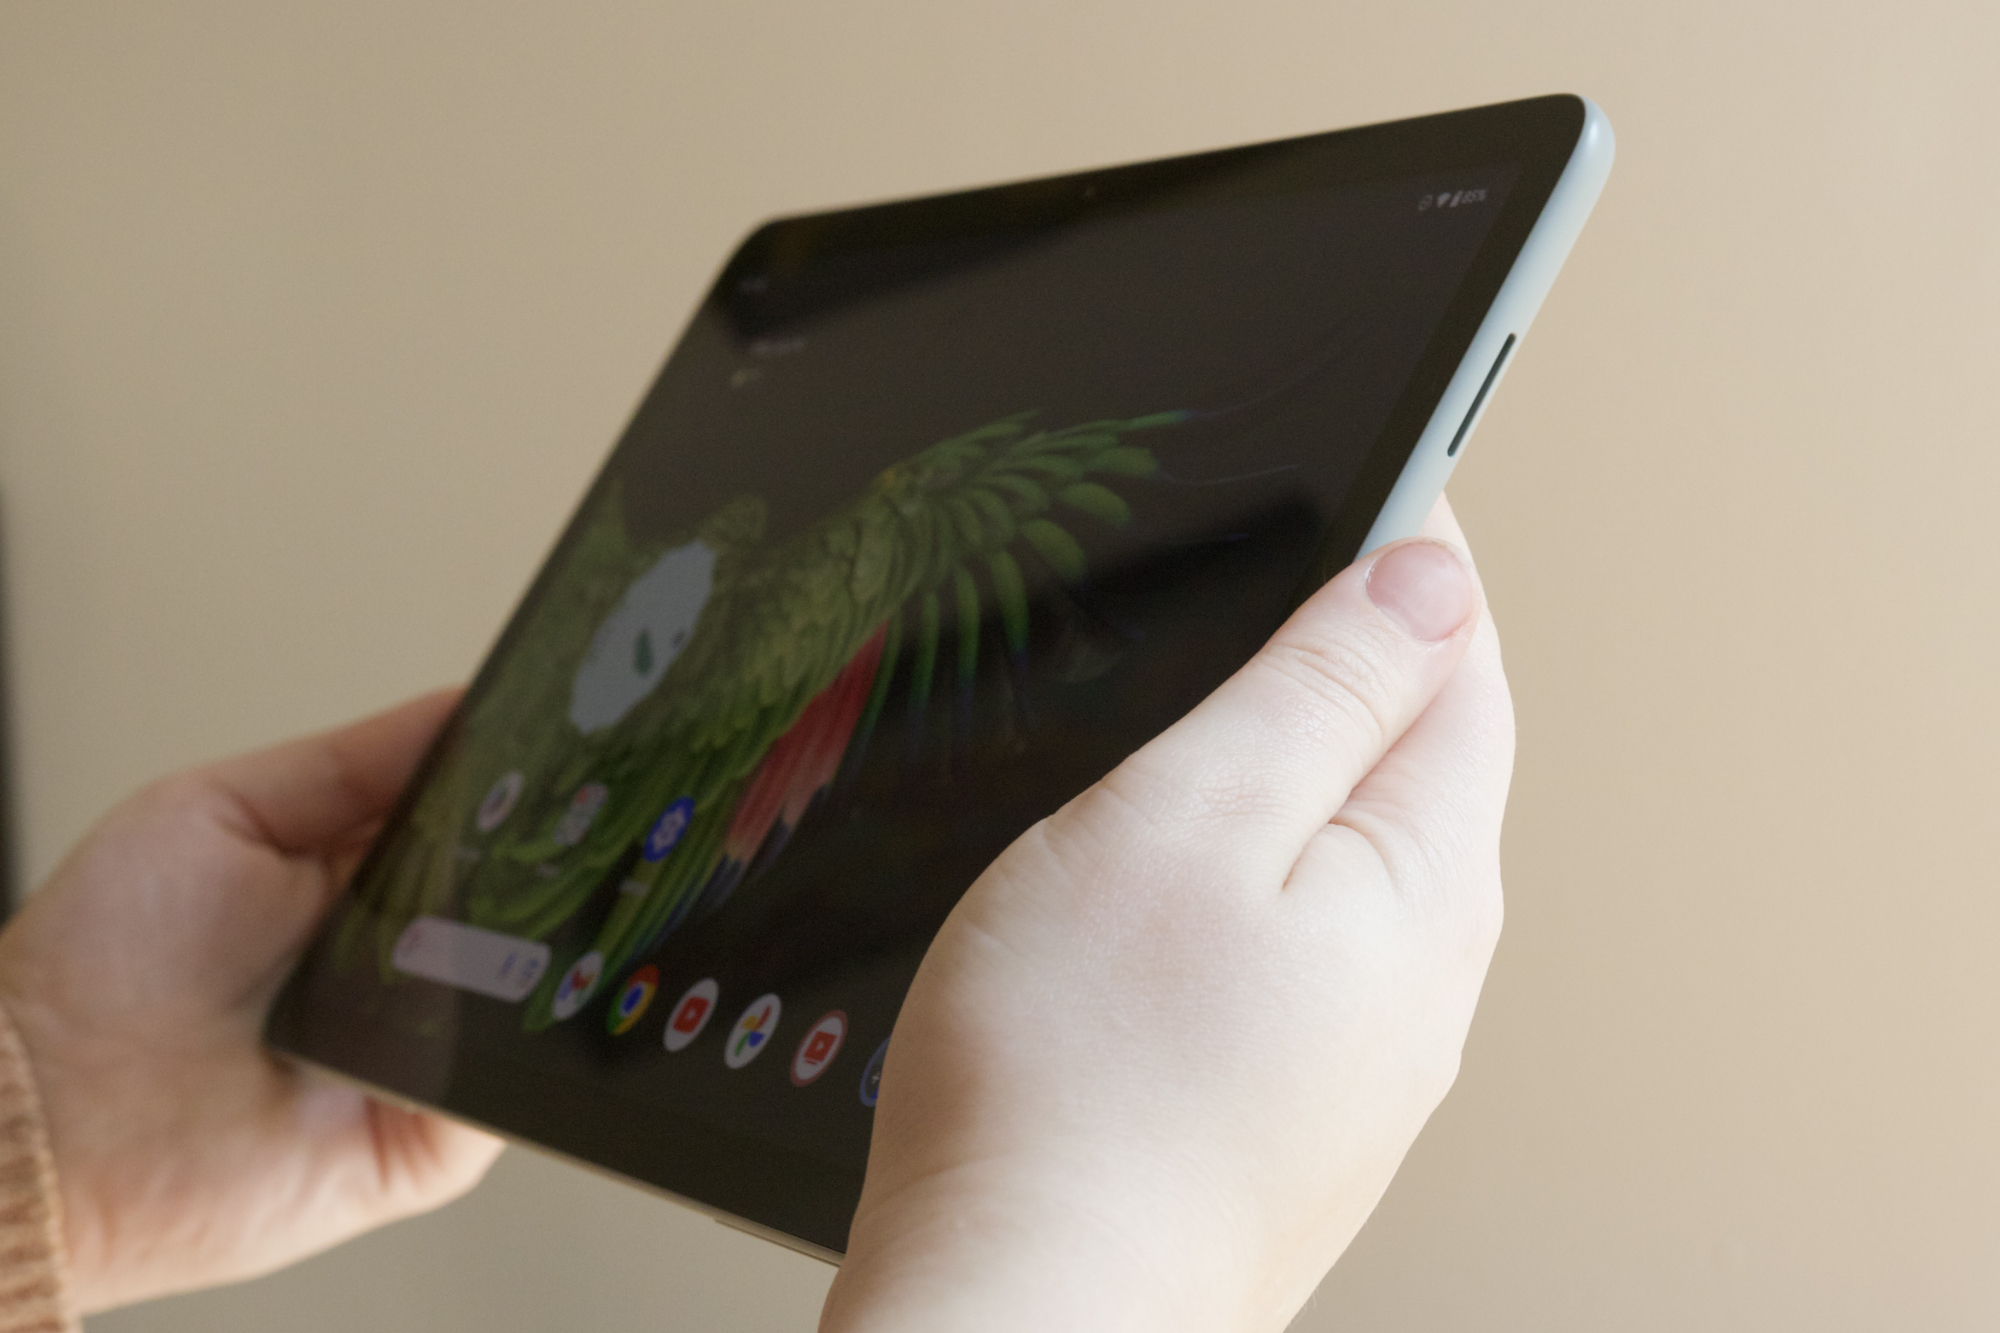 The problem with Google's Pixel Tablet